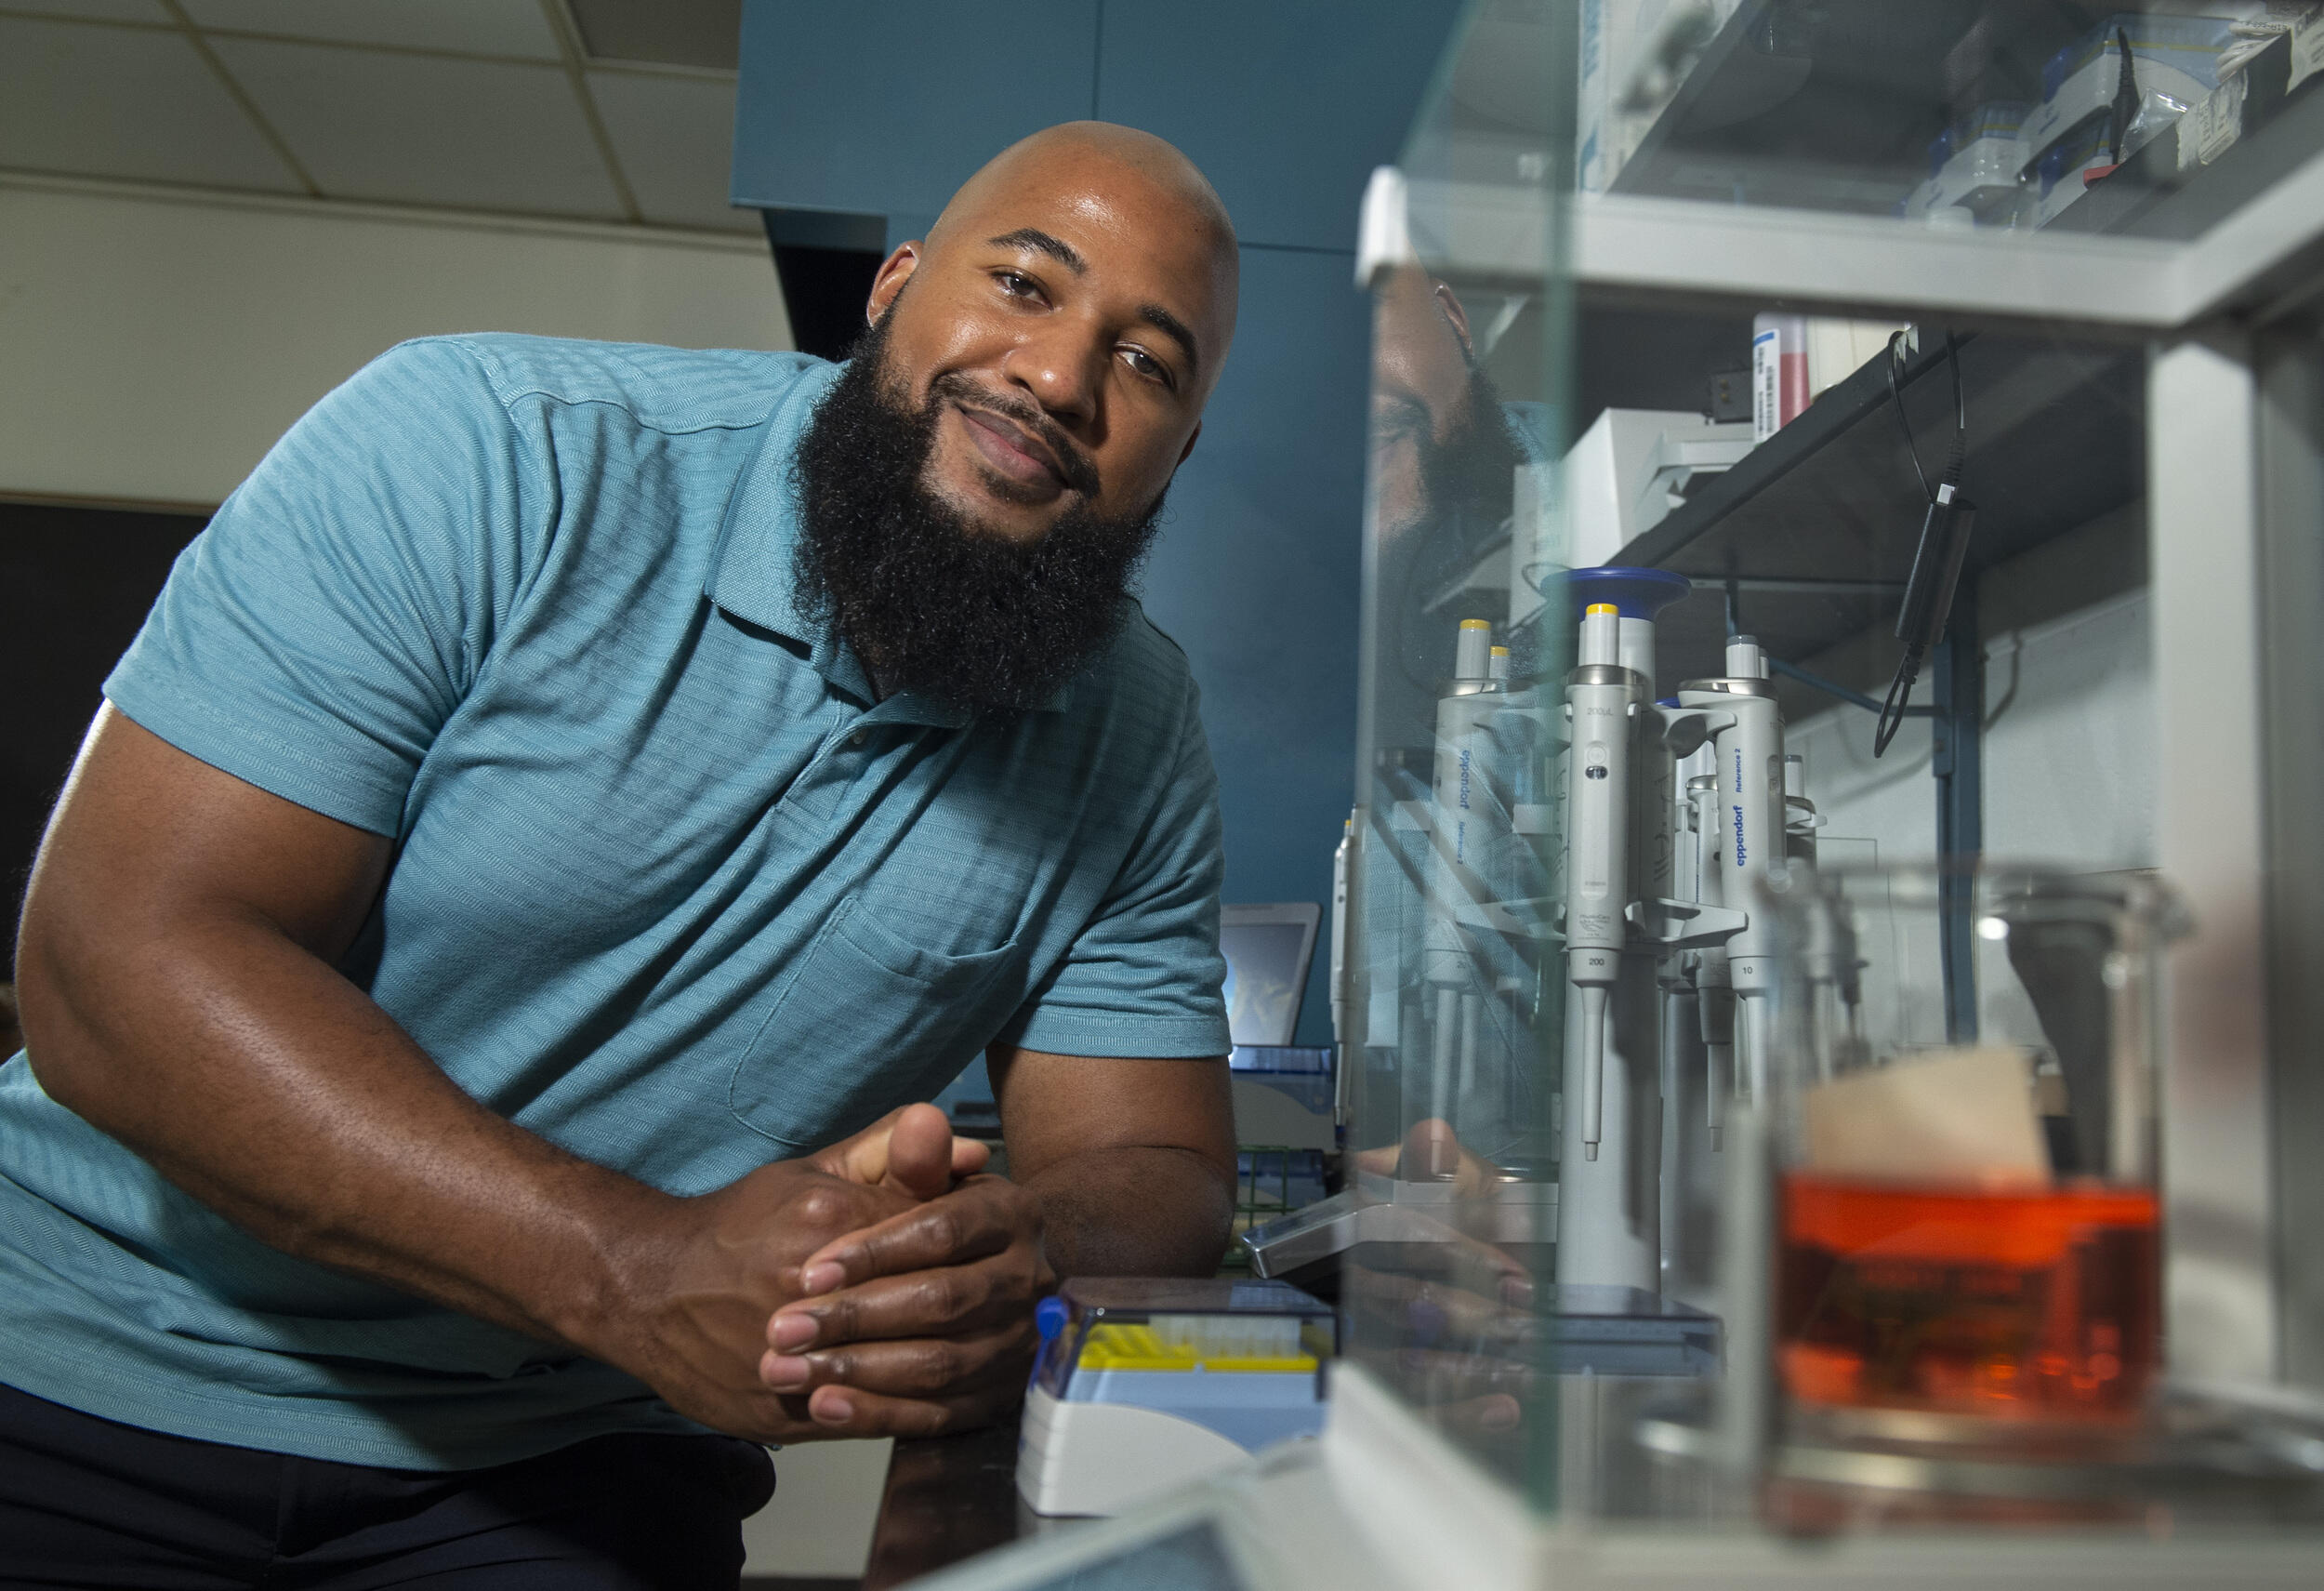 Mychal Smith, Ph.D., an assistant professor in the VCU Department of Chemistry, leans on a counter in a lab.